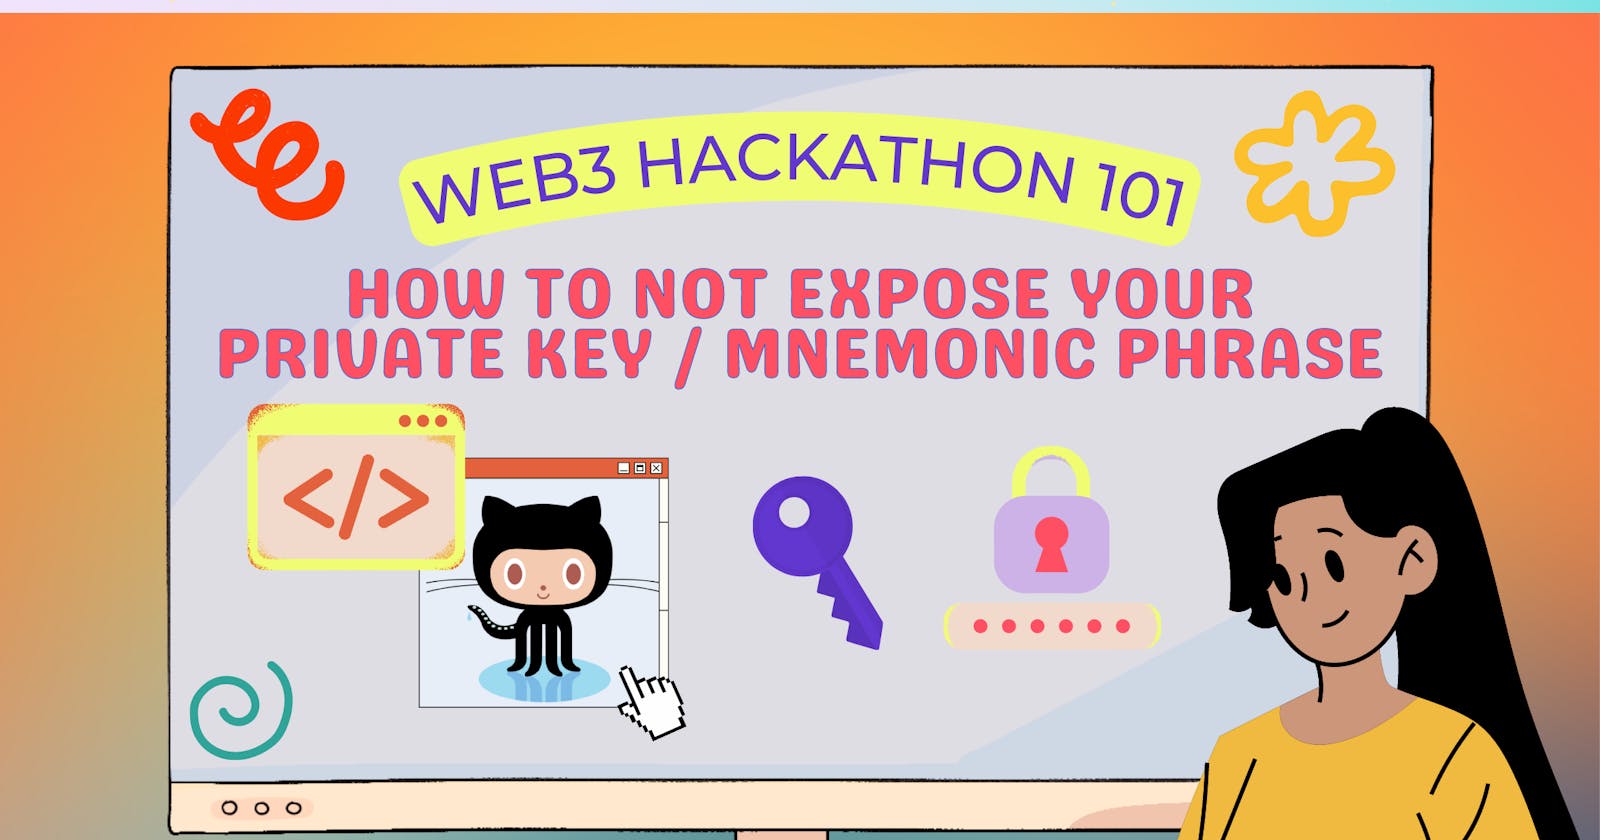 Web3 Hackathon 101: How To Not Expose Your Private Key / Mnemonic Phrase